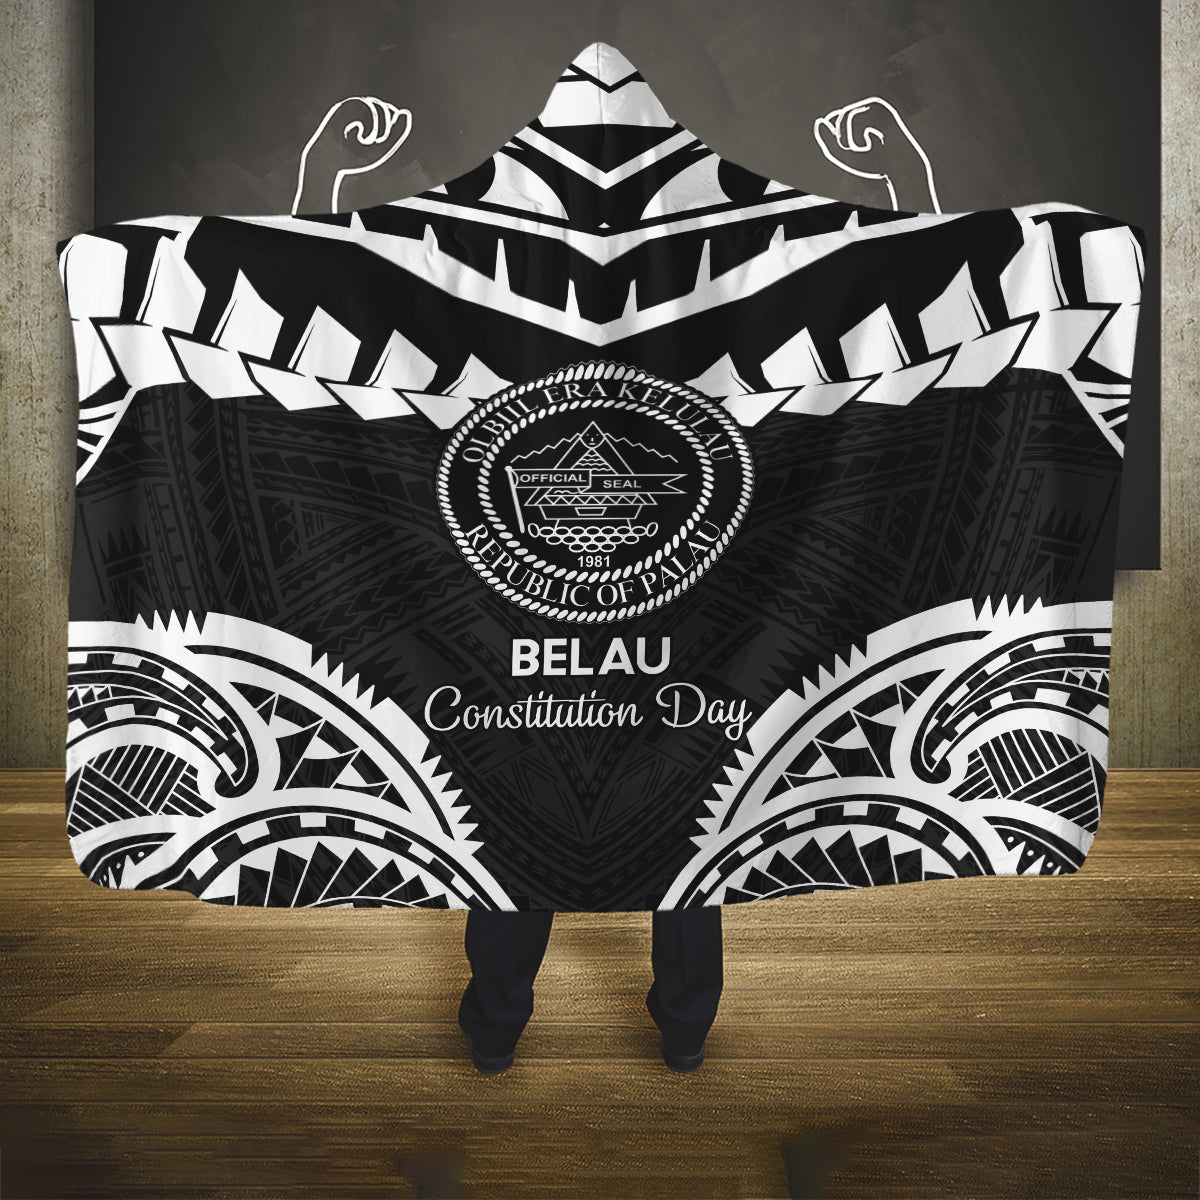 Palau Constitution Day Hooded Blanket Belau Seal With Polynesian Pattern - Black